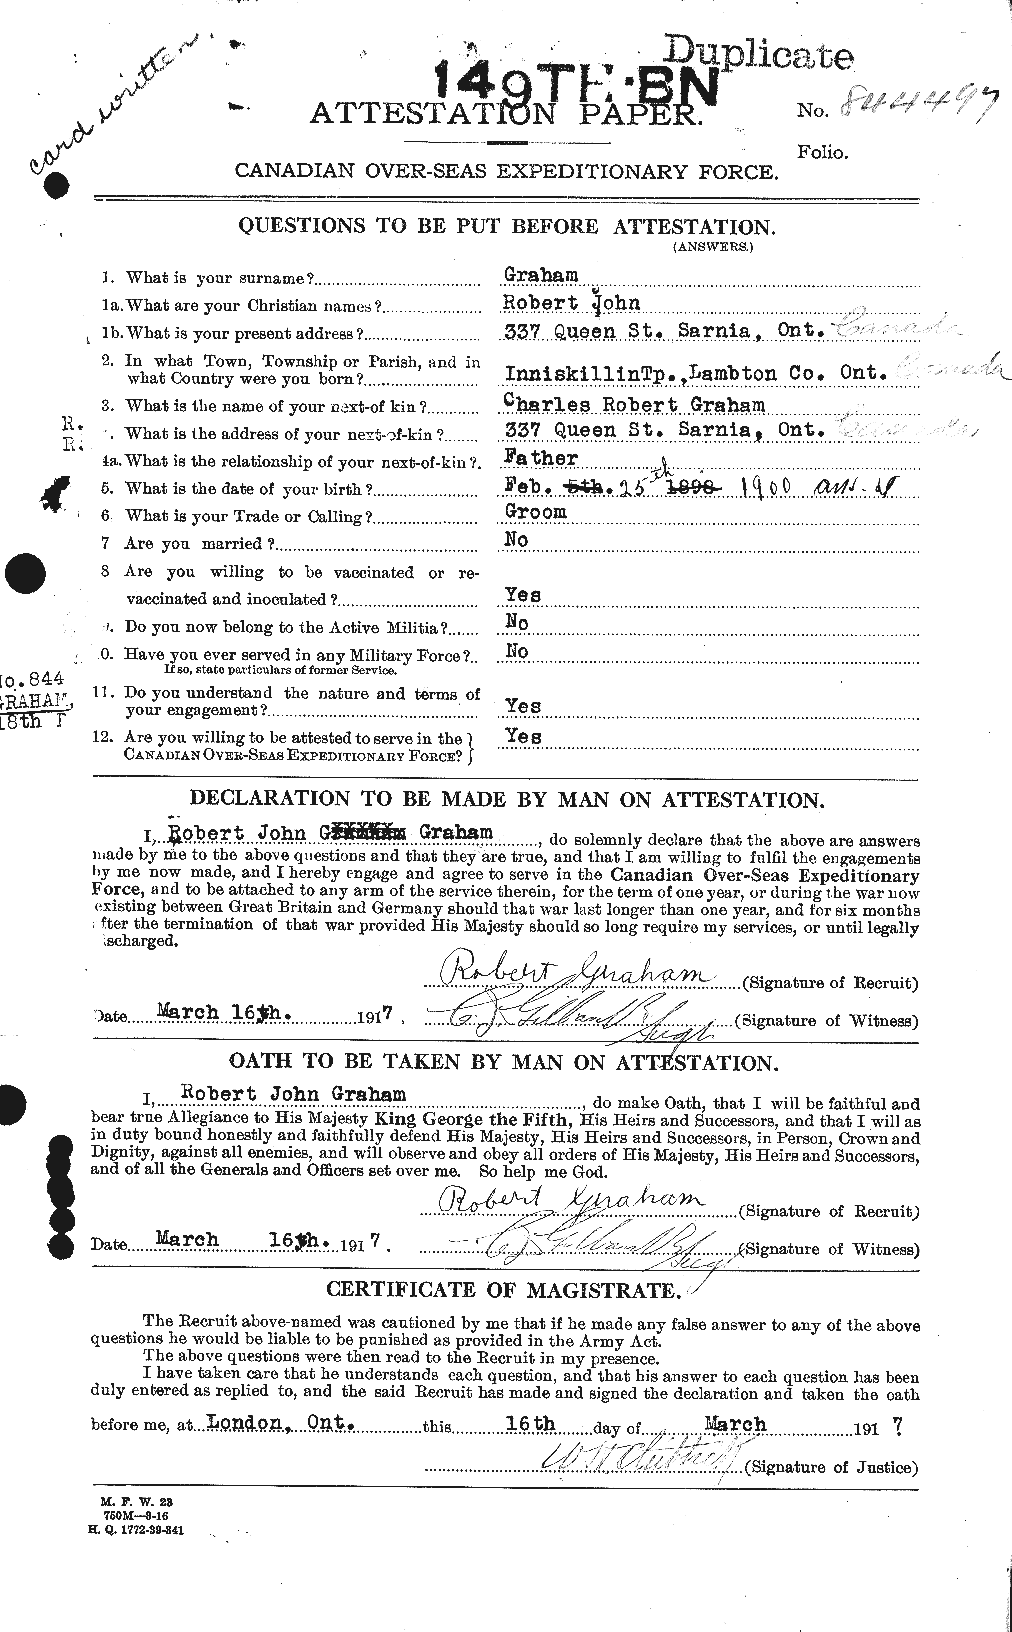 Personnel Records of the First World War - CEF 359412a